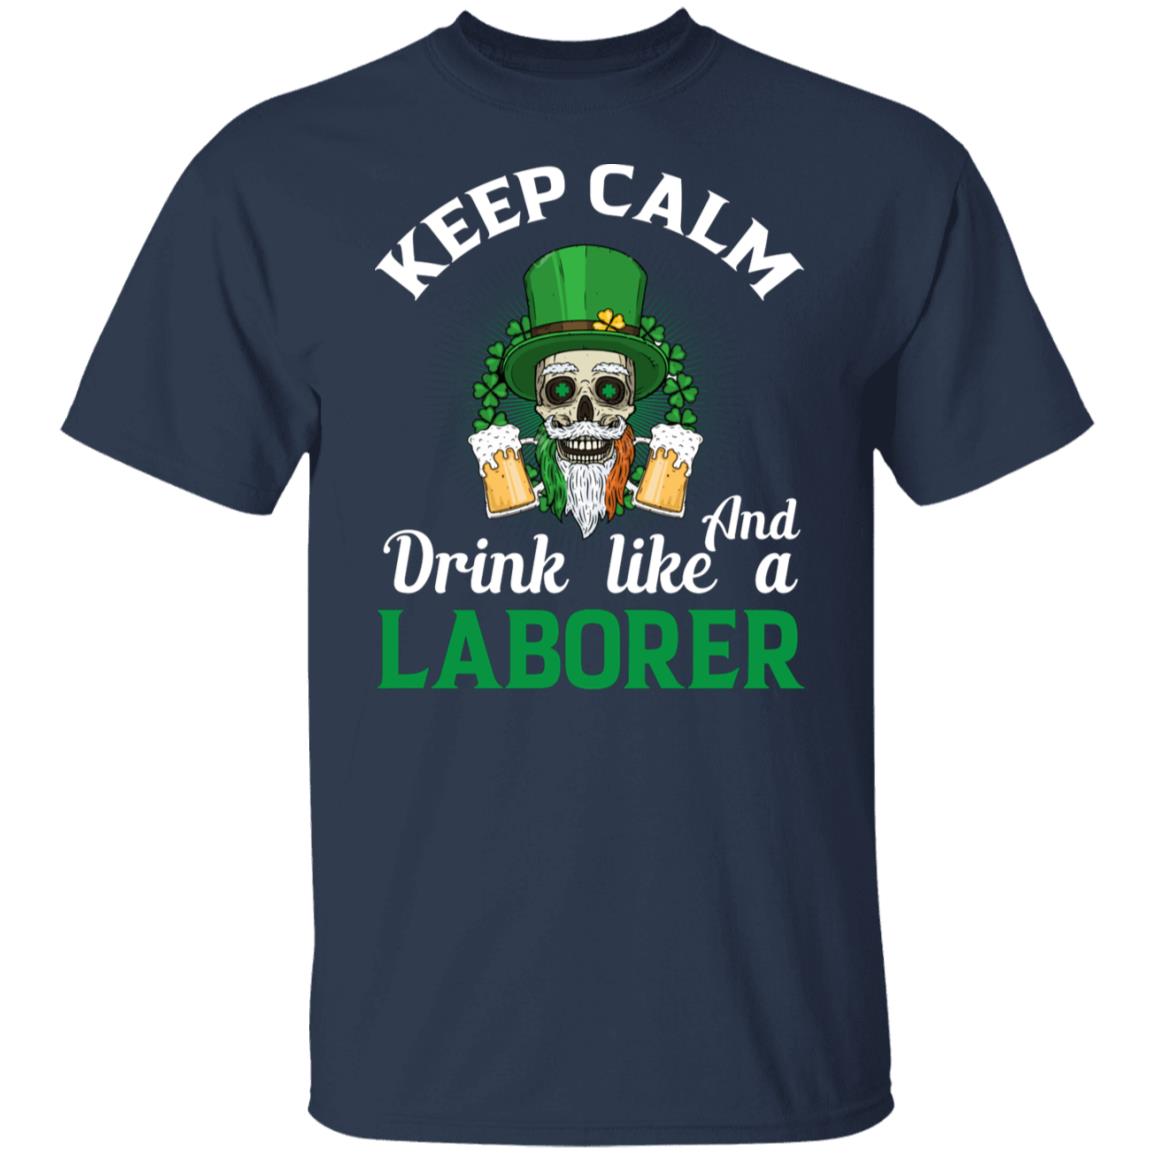 Keep Calm and Drink Like a Labored Funny St Patrick's Day Shirt